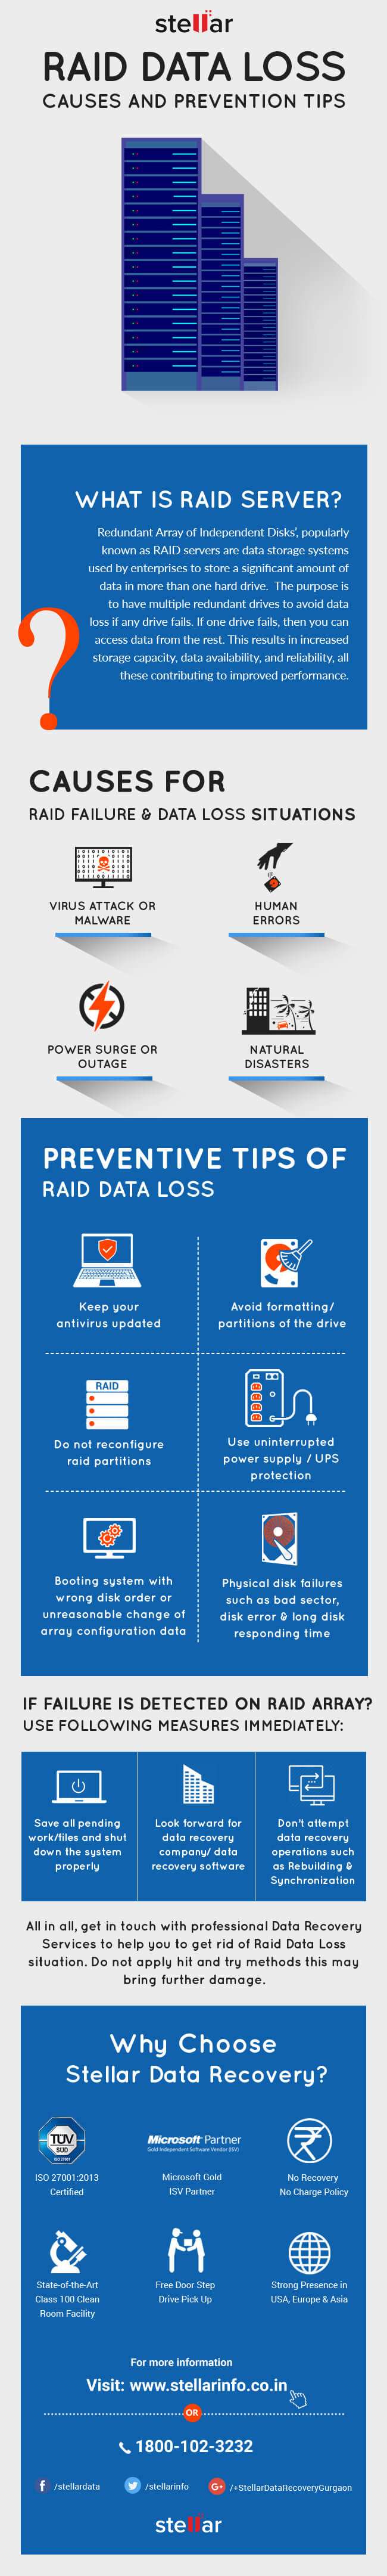 RAID Server - Data Loss Causes and Prevention Tips